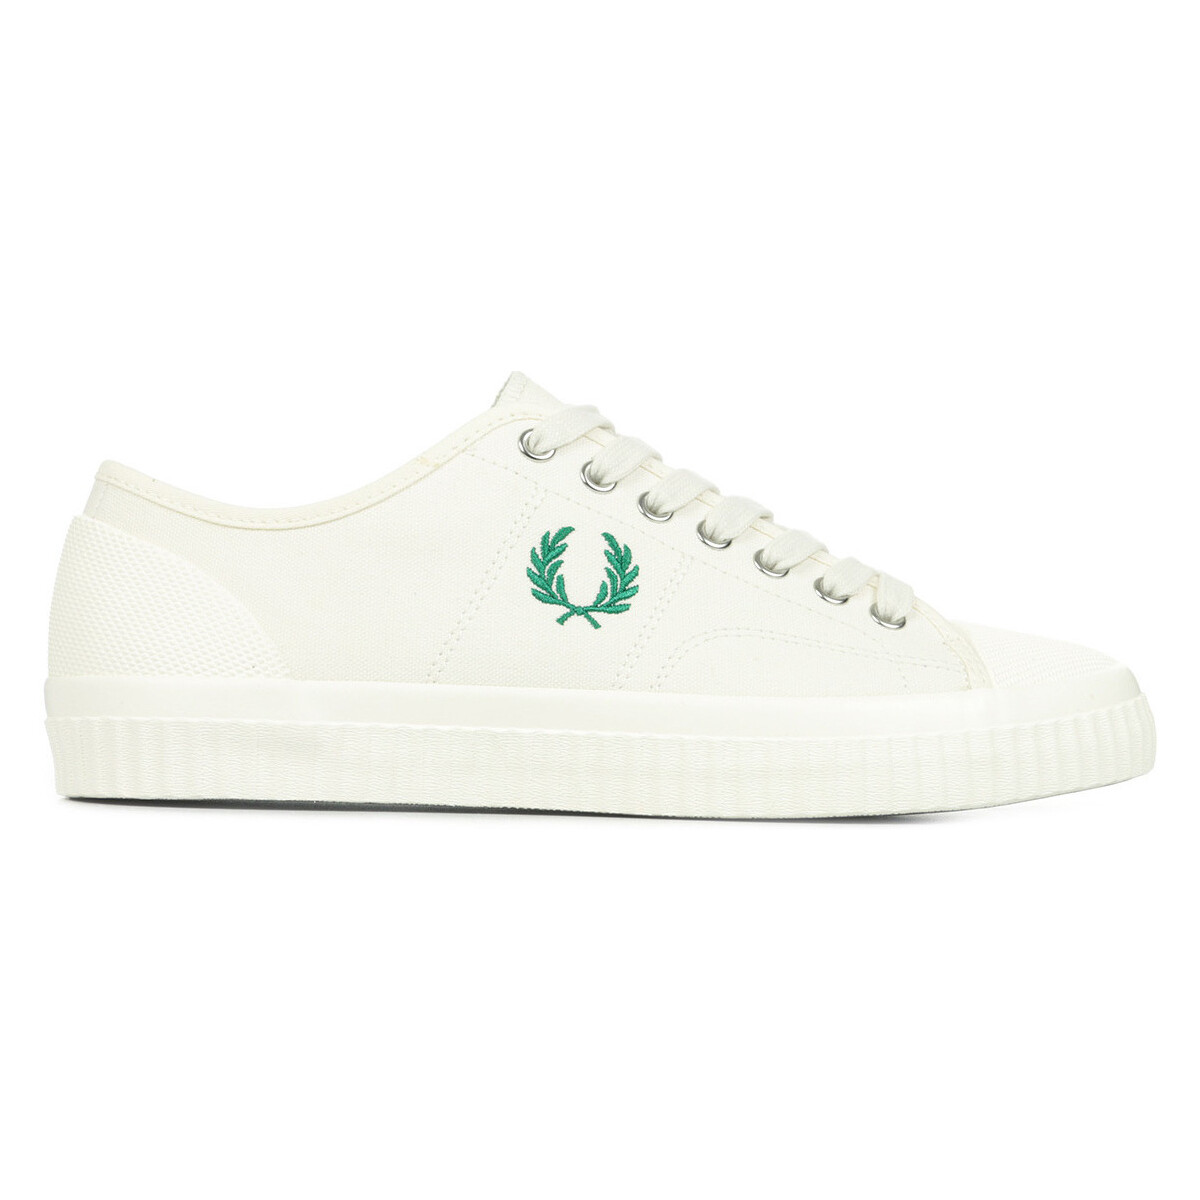 Schuhe Herren Sneaker Fred Perry Hughes Low Canvas Other